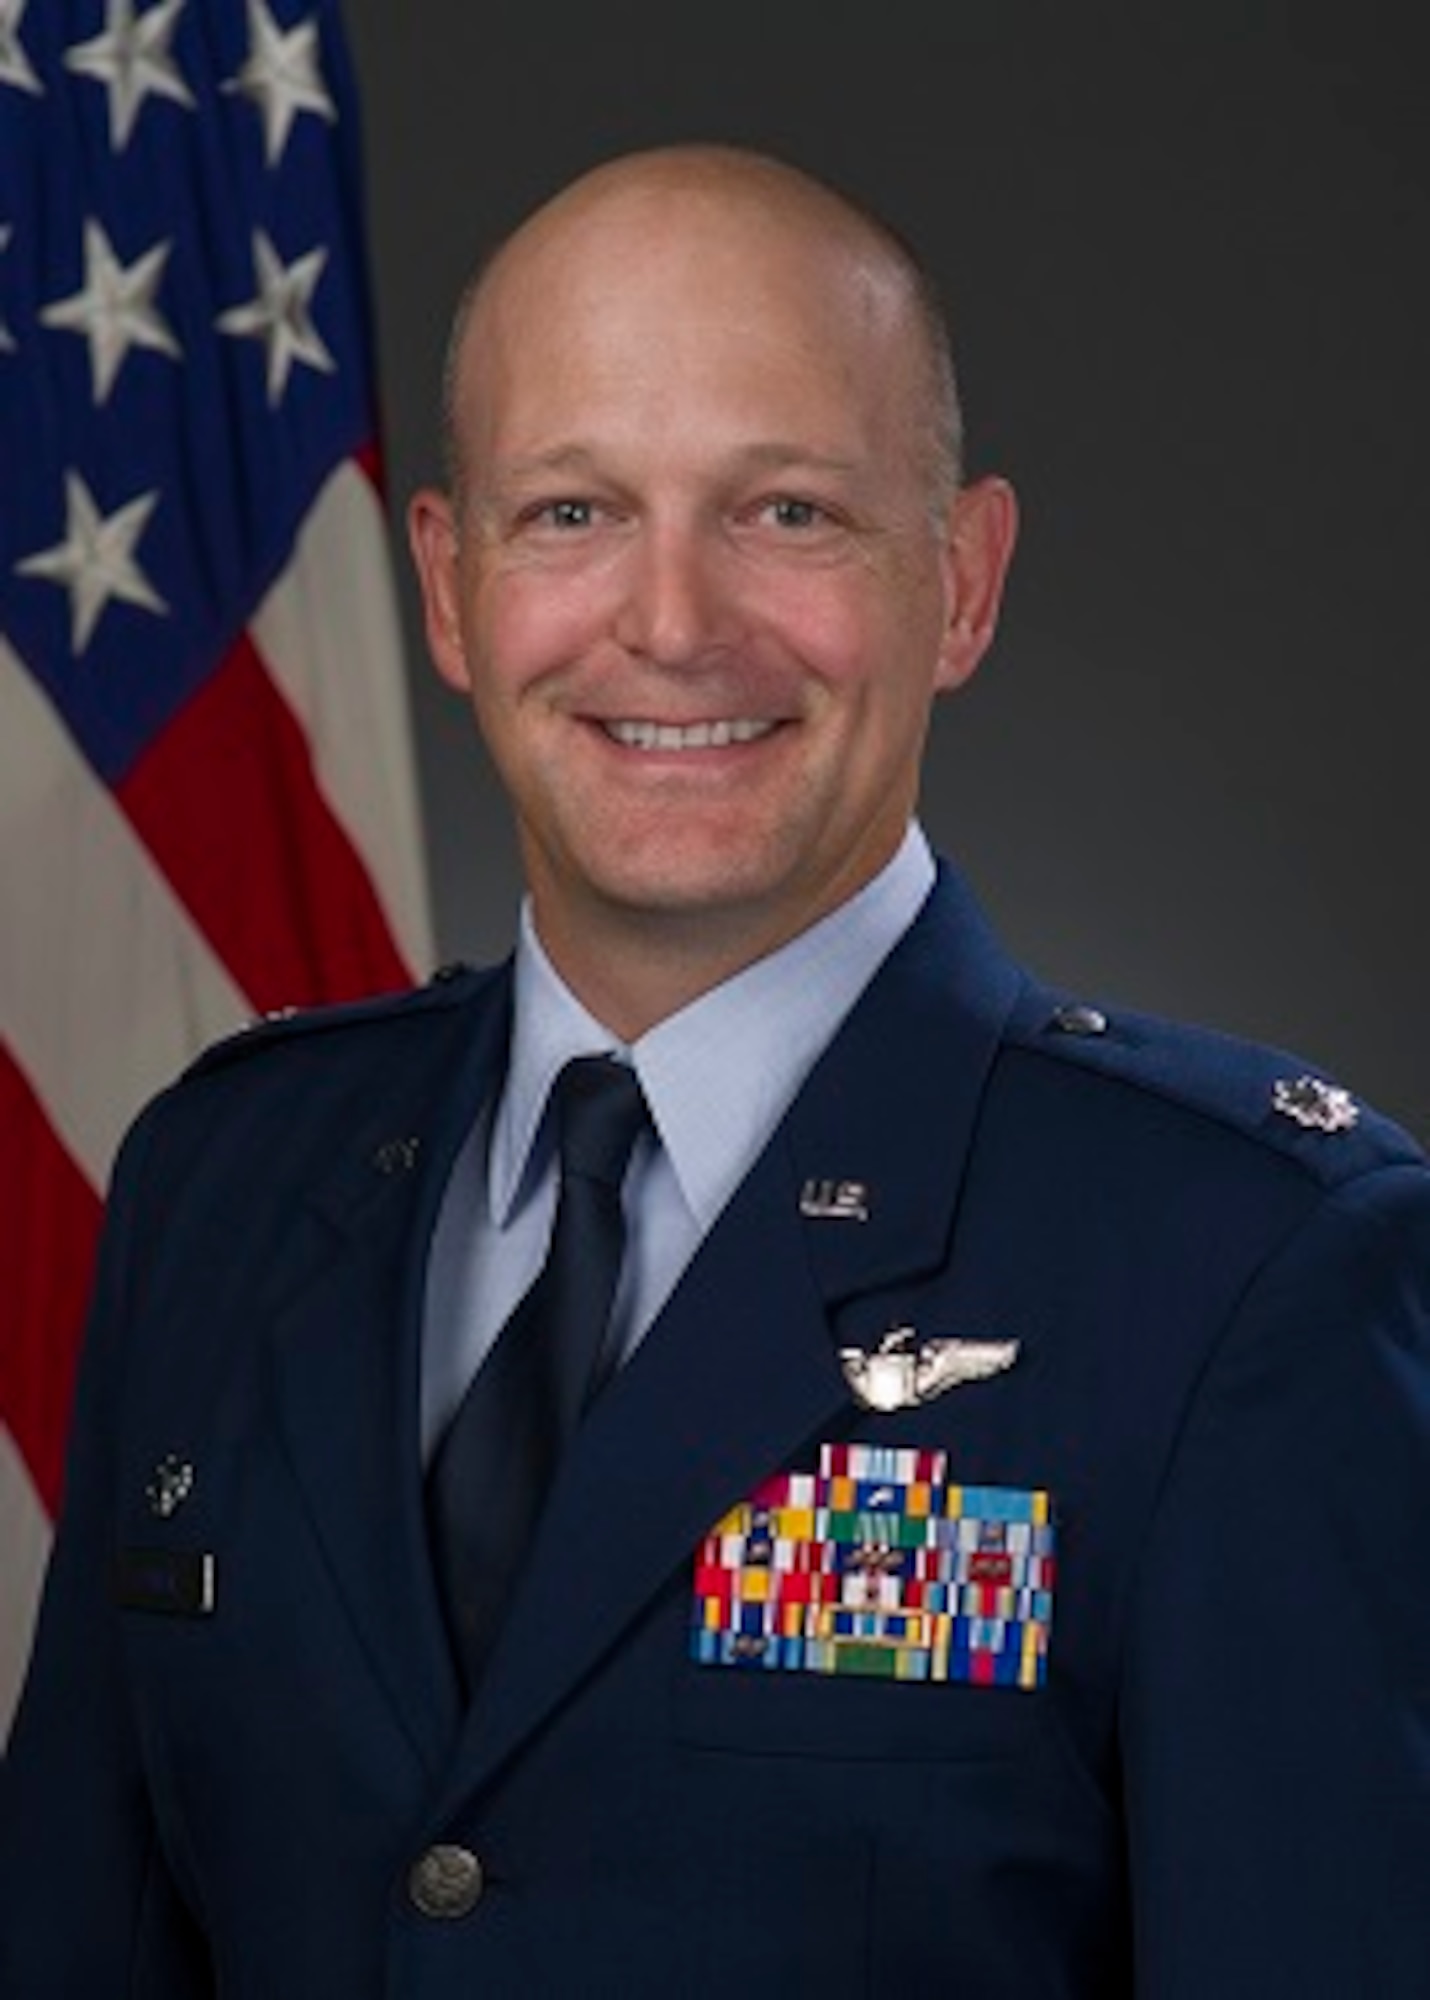 Lt. Col. Blaine Baker, 82st Contingency Response Squadron commander, shares his thoughts on leading and empowering Airmen. (U.S. Air Force photo)